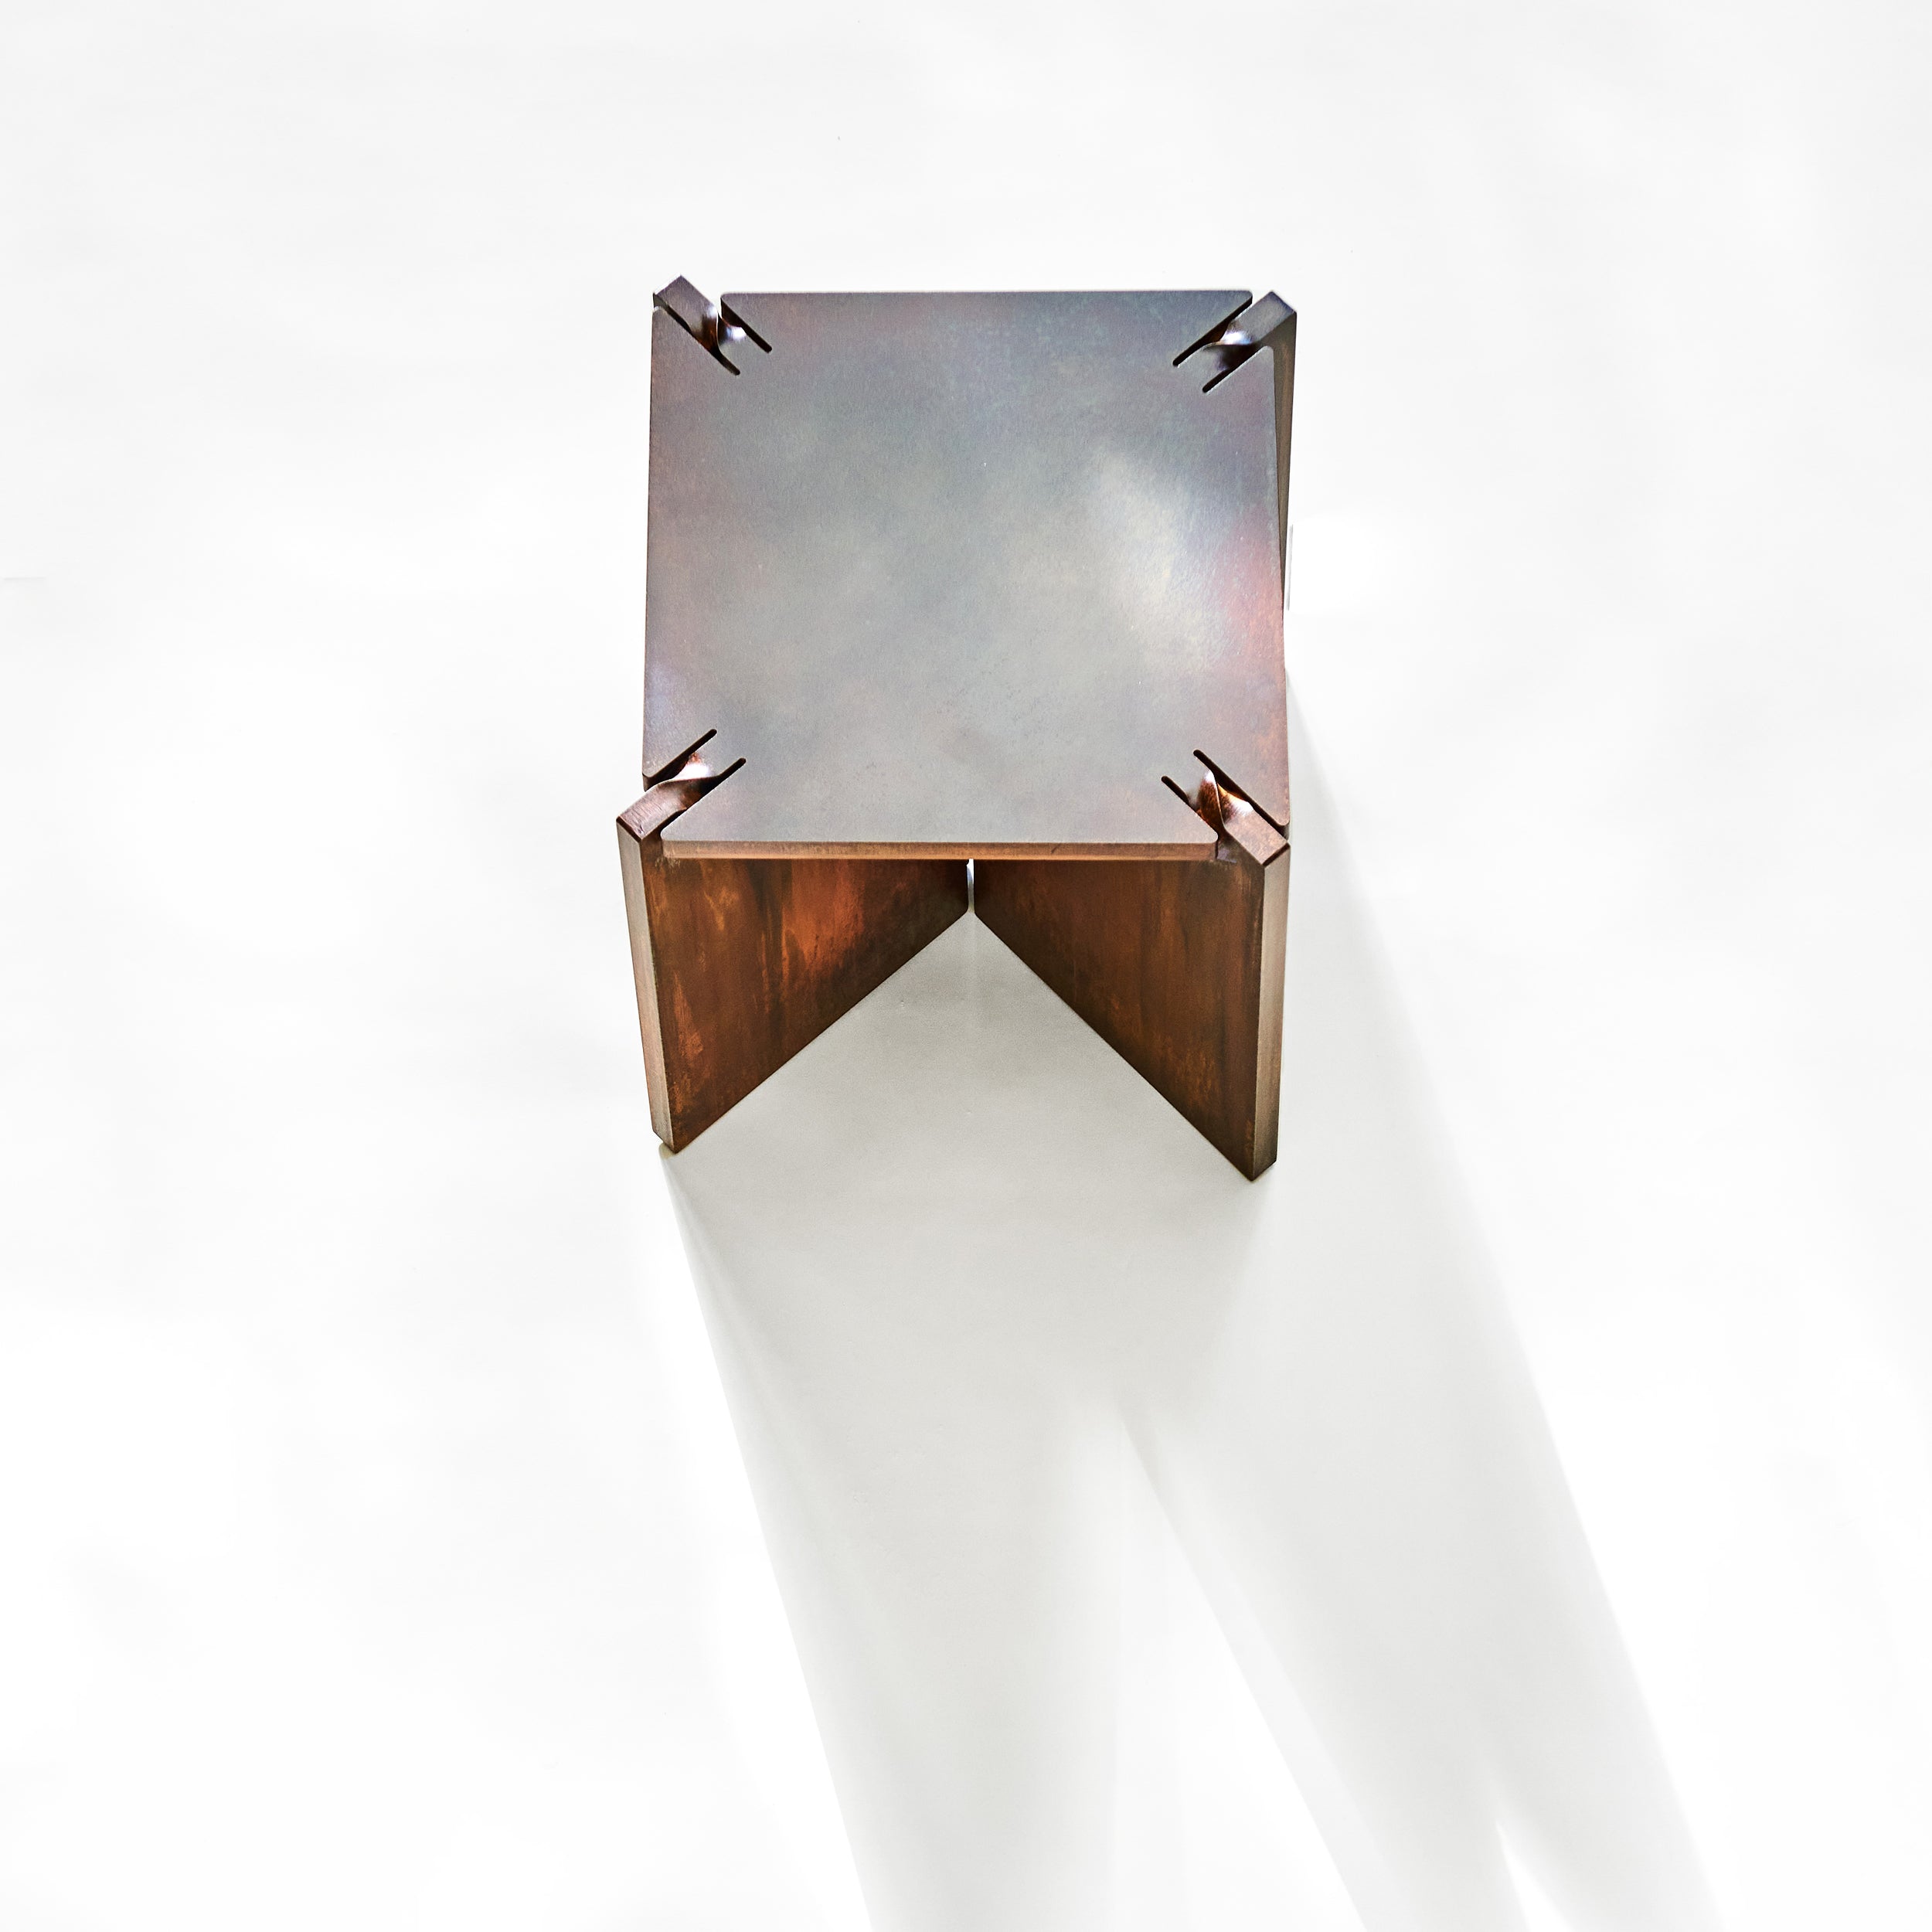 ONE Square Steel Table with Copper Patina by Frank Penders